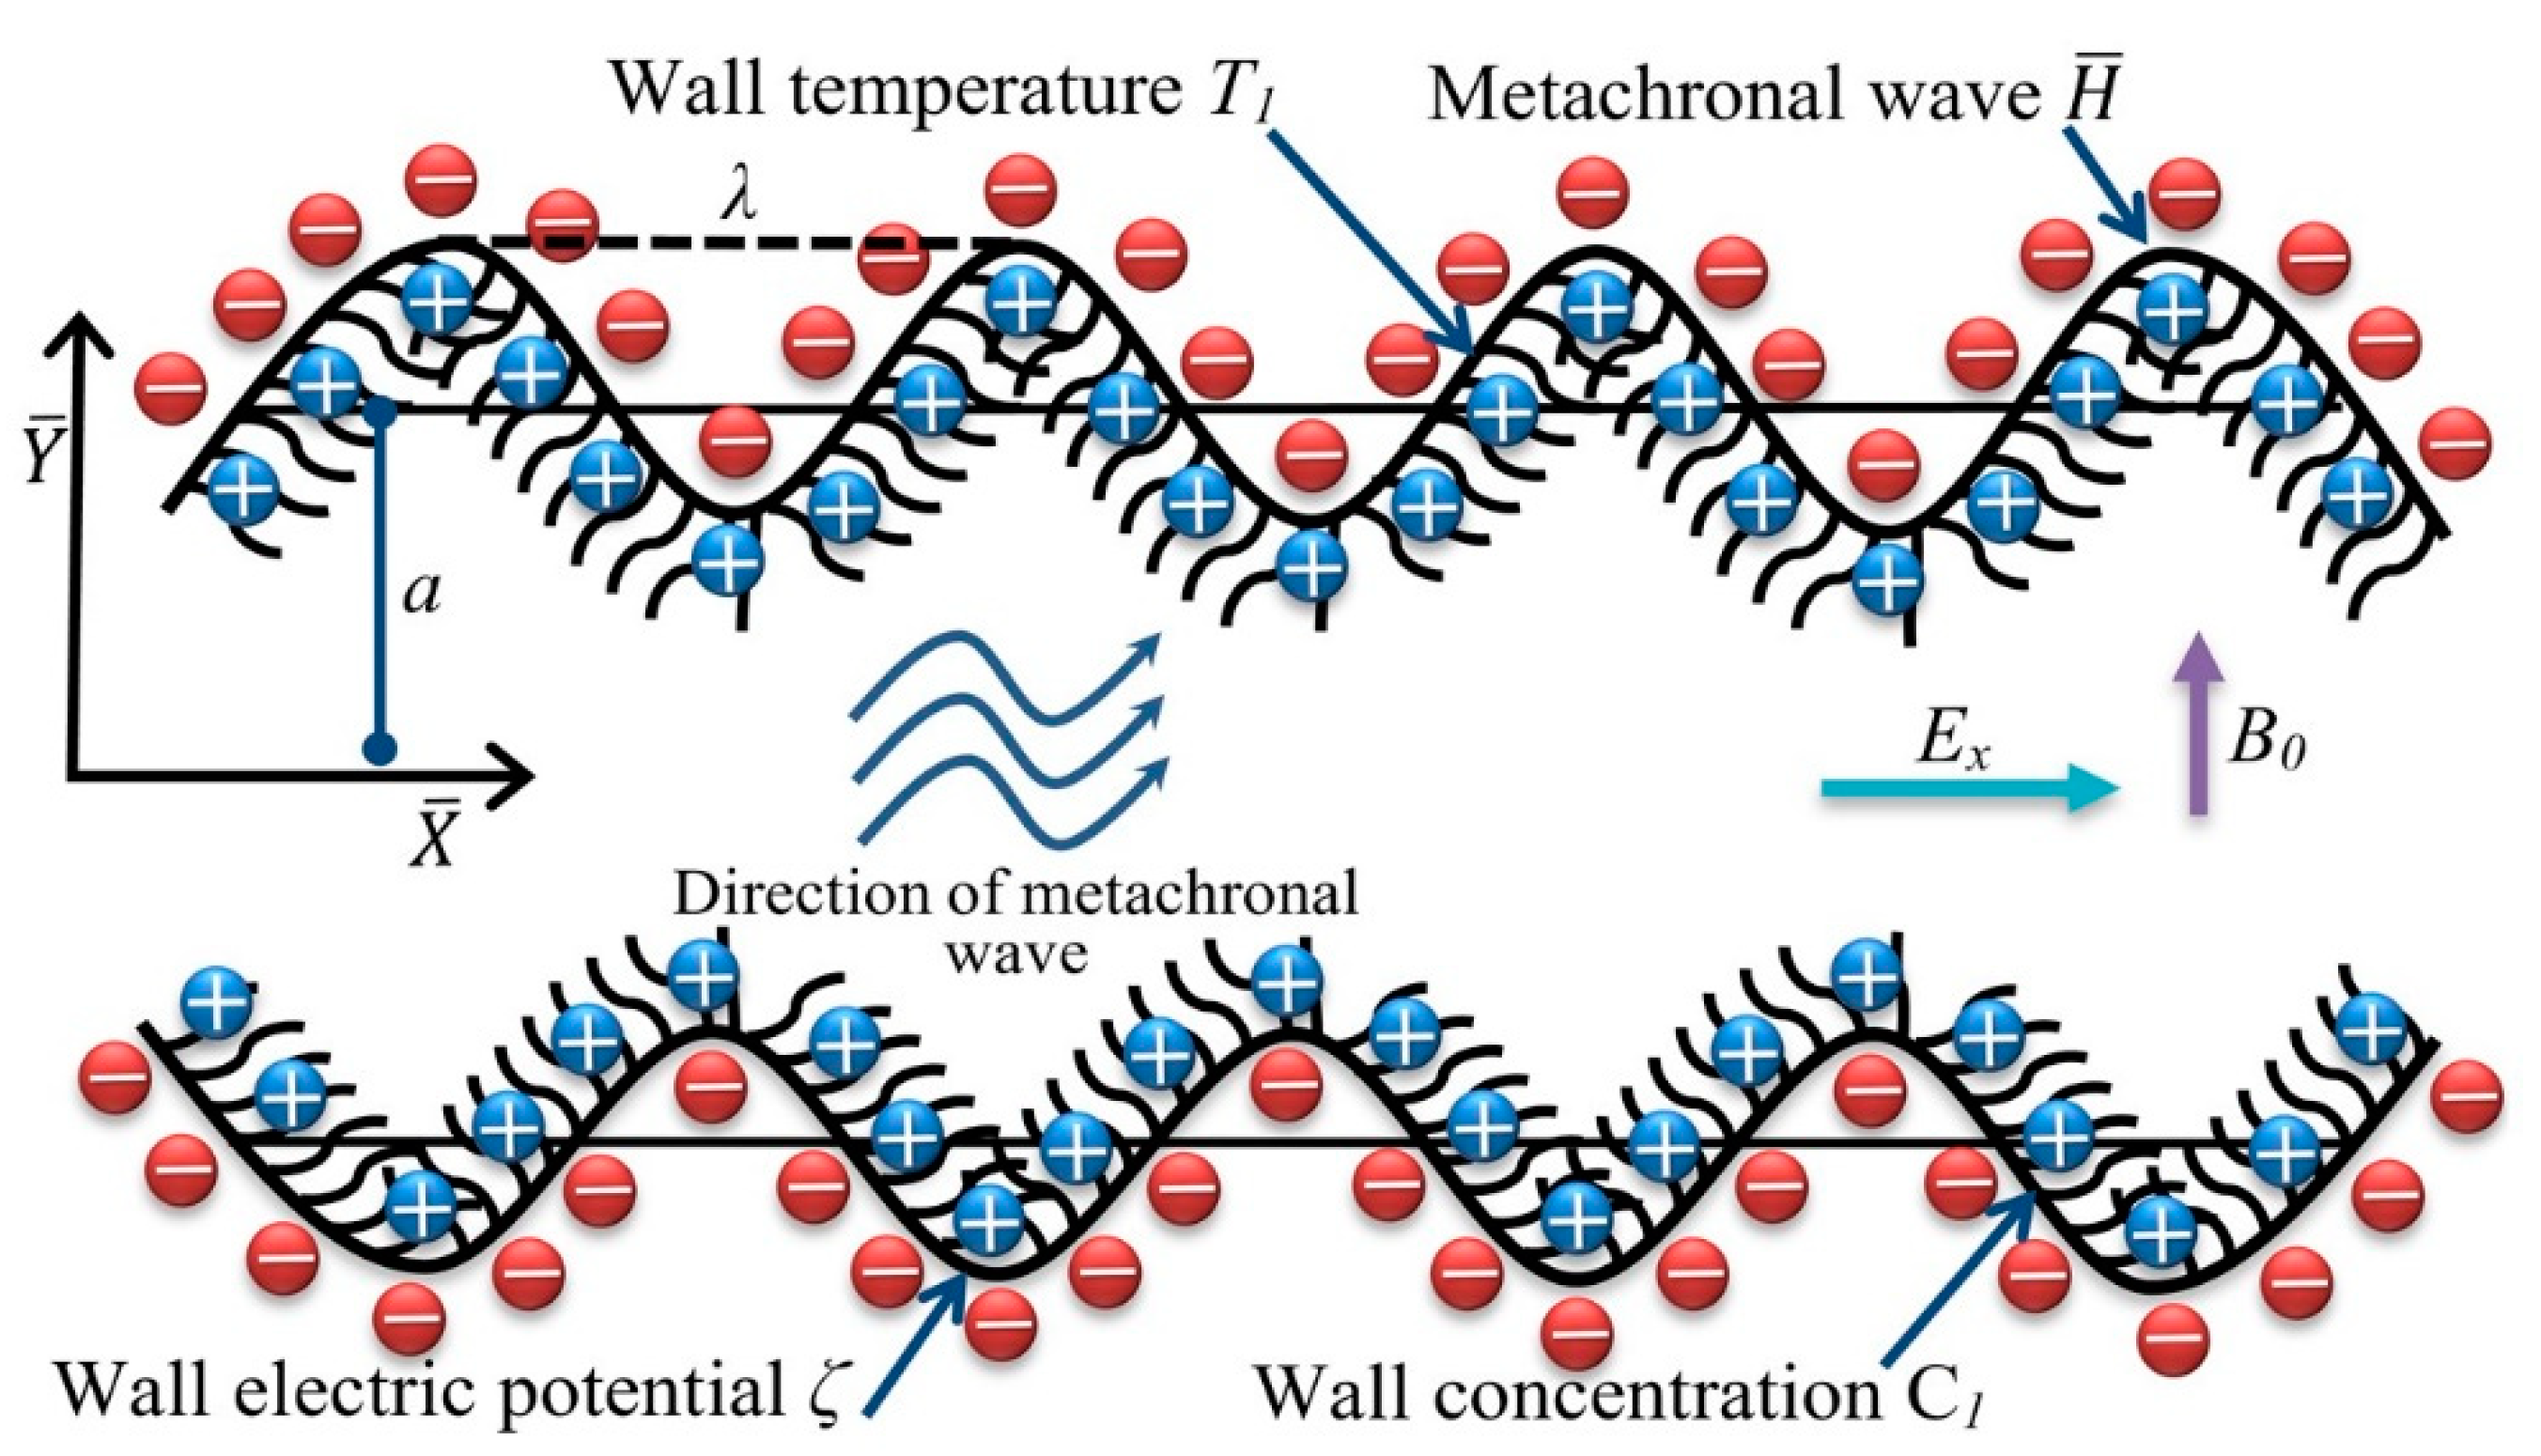 RETRACTED ARTICLE: Solar energy optimization in solar-HVAC using Sutterby  hybrid nanofluid with Smoluchowski temperature conditions: a solar thermal  application